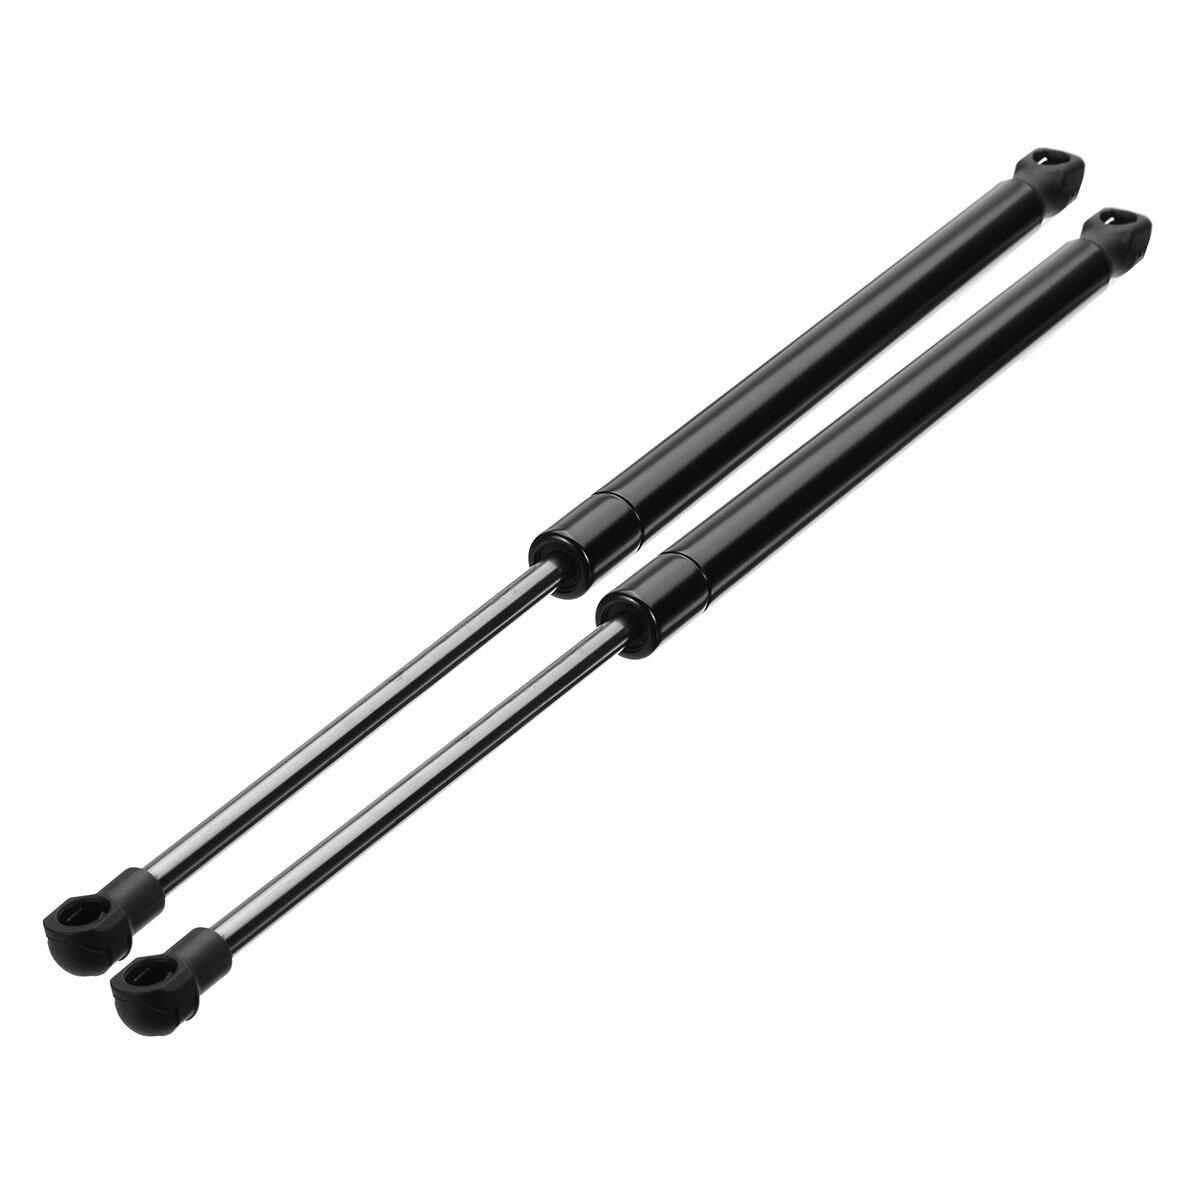 2pcs Auto Rear Tailgate Boot Gas Spring Struts Prop Lift Support Damper for HYUNDAI i10 (PA) Hatchback 2007-2015 2016